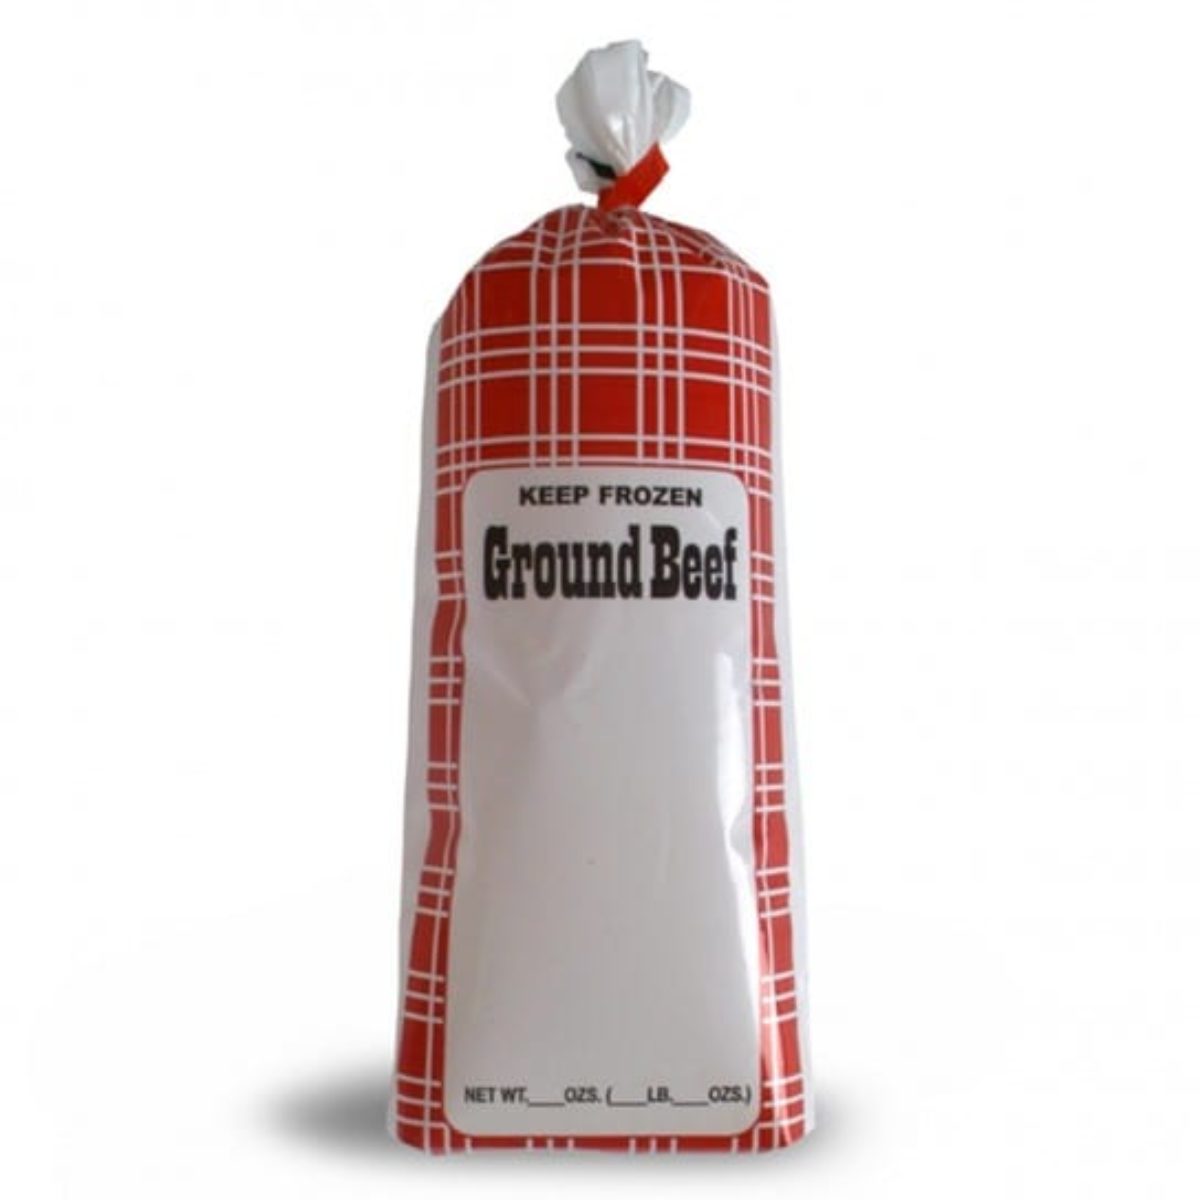 LEM Products 2 lb. Ground Beef Bags - 25 count (Replaces 039